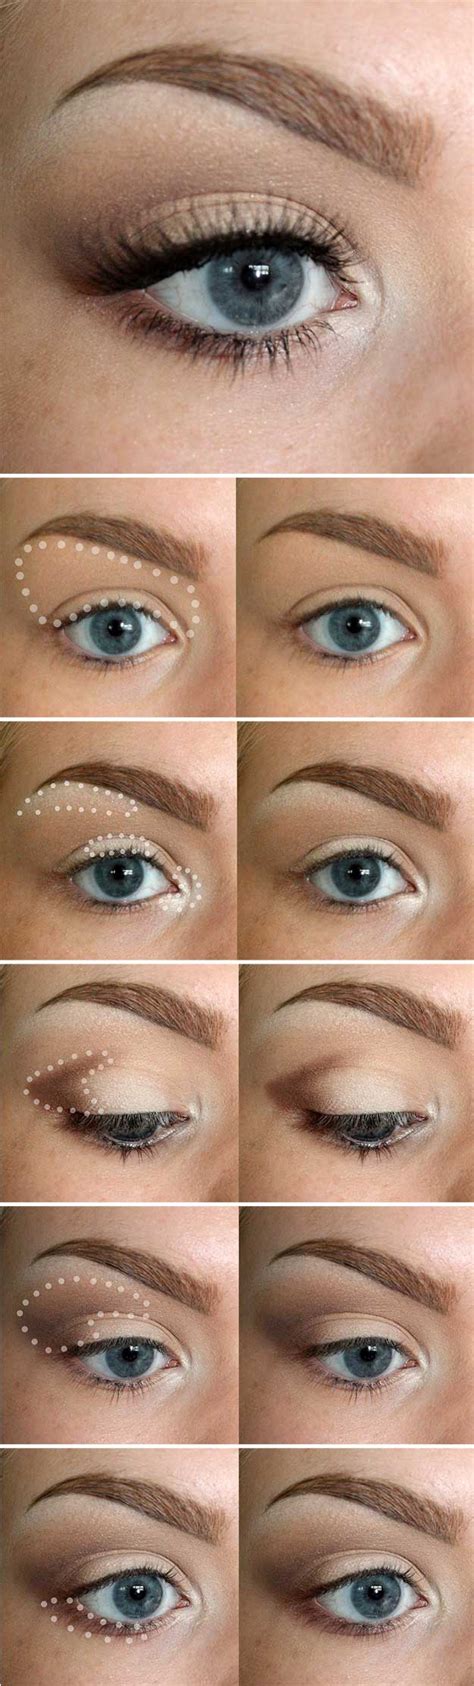 25 Amazing Makeup Tips For Fair Skin And Blue Eyes